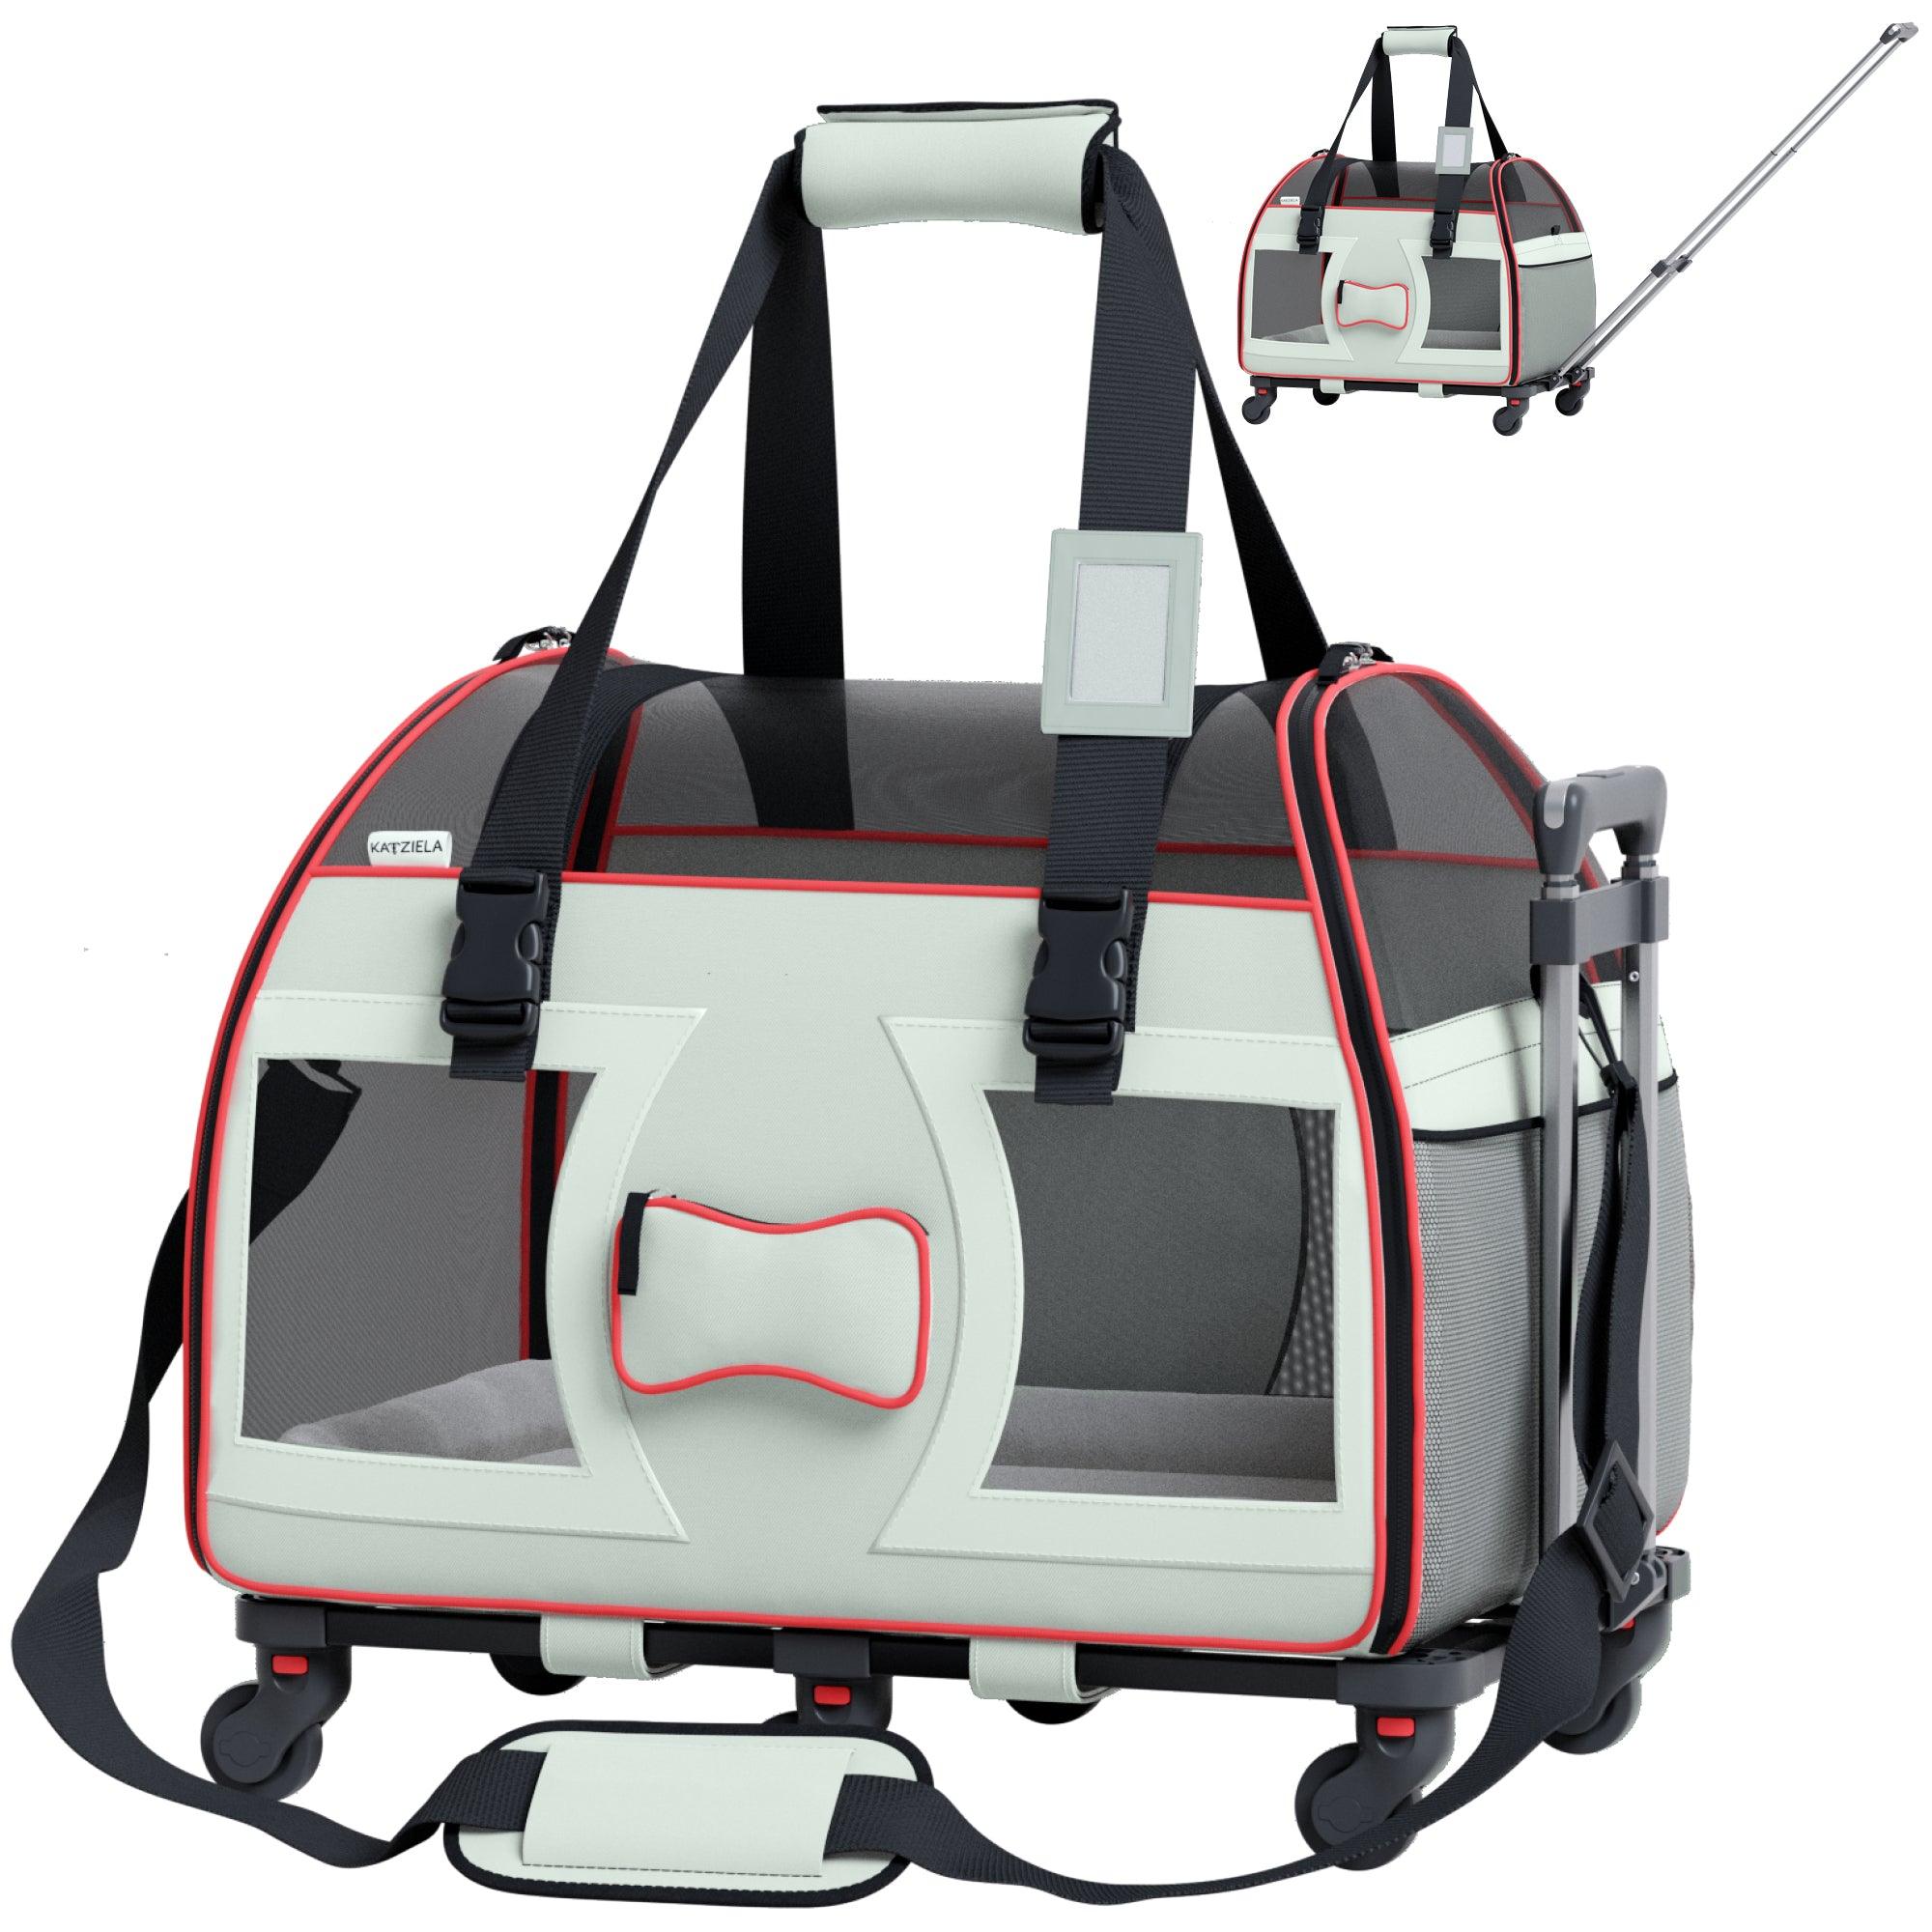 Bone Cruiser™ Pet Carrier with Removable Wheels and Telescopic Handle - Katziela